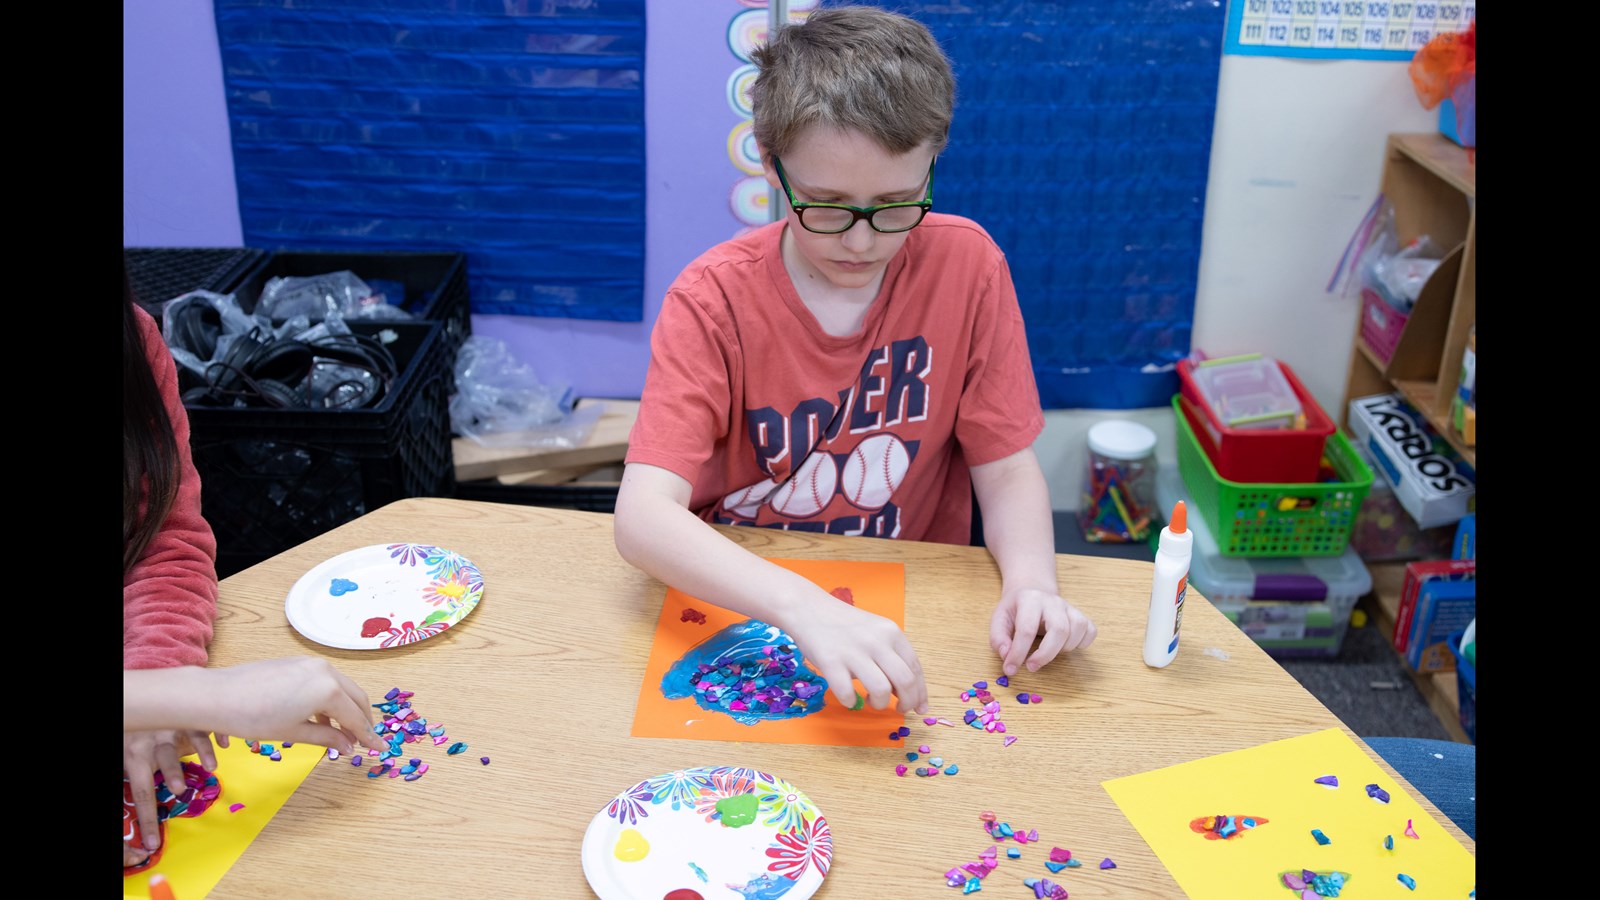 Students at Powder Springs Elementary School participate in Arts for the Heart Day.